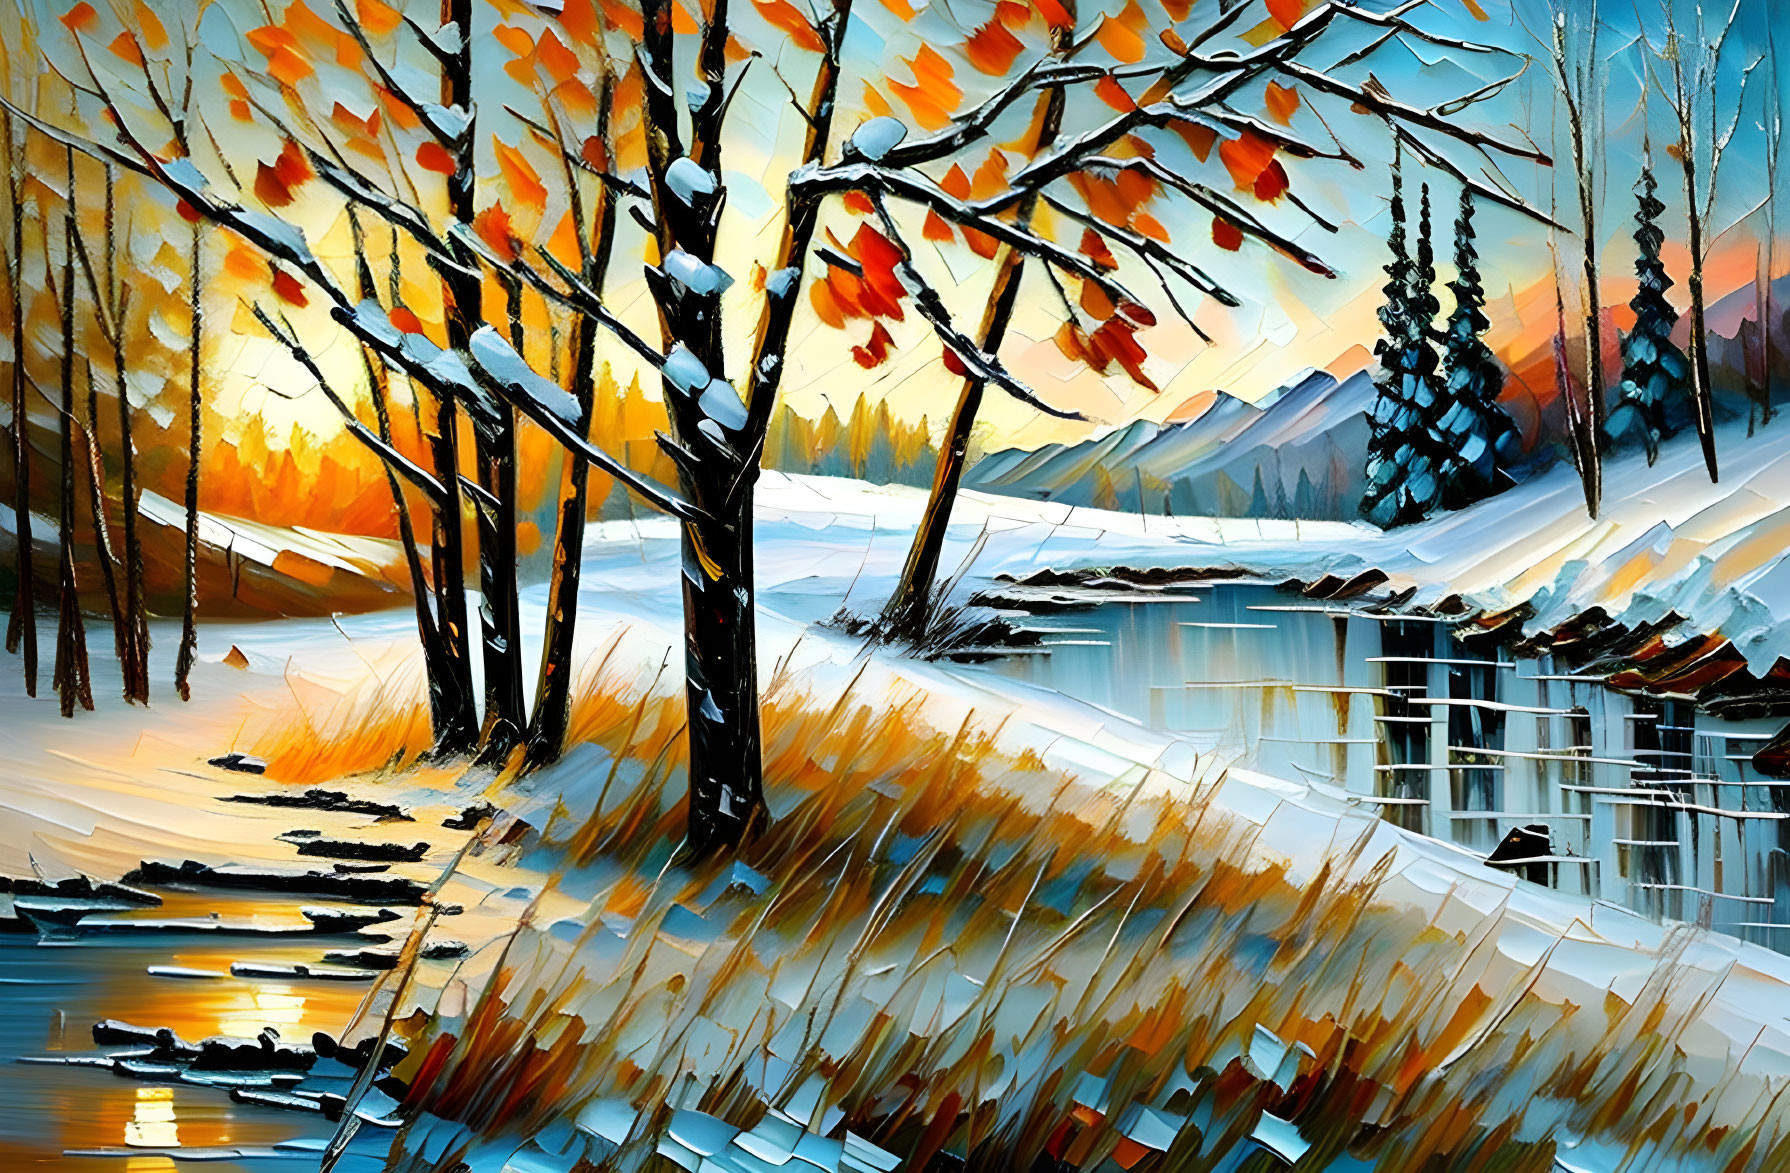 Winter landscape painting with river, snow, trees, and blue sky